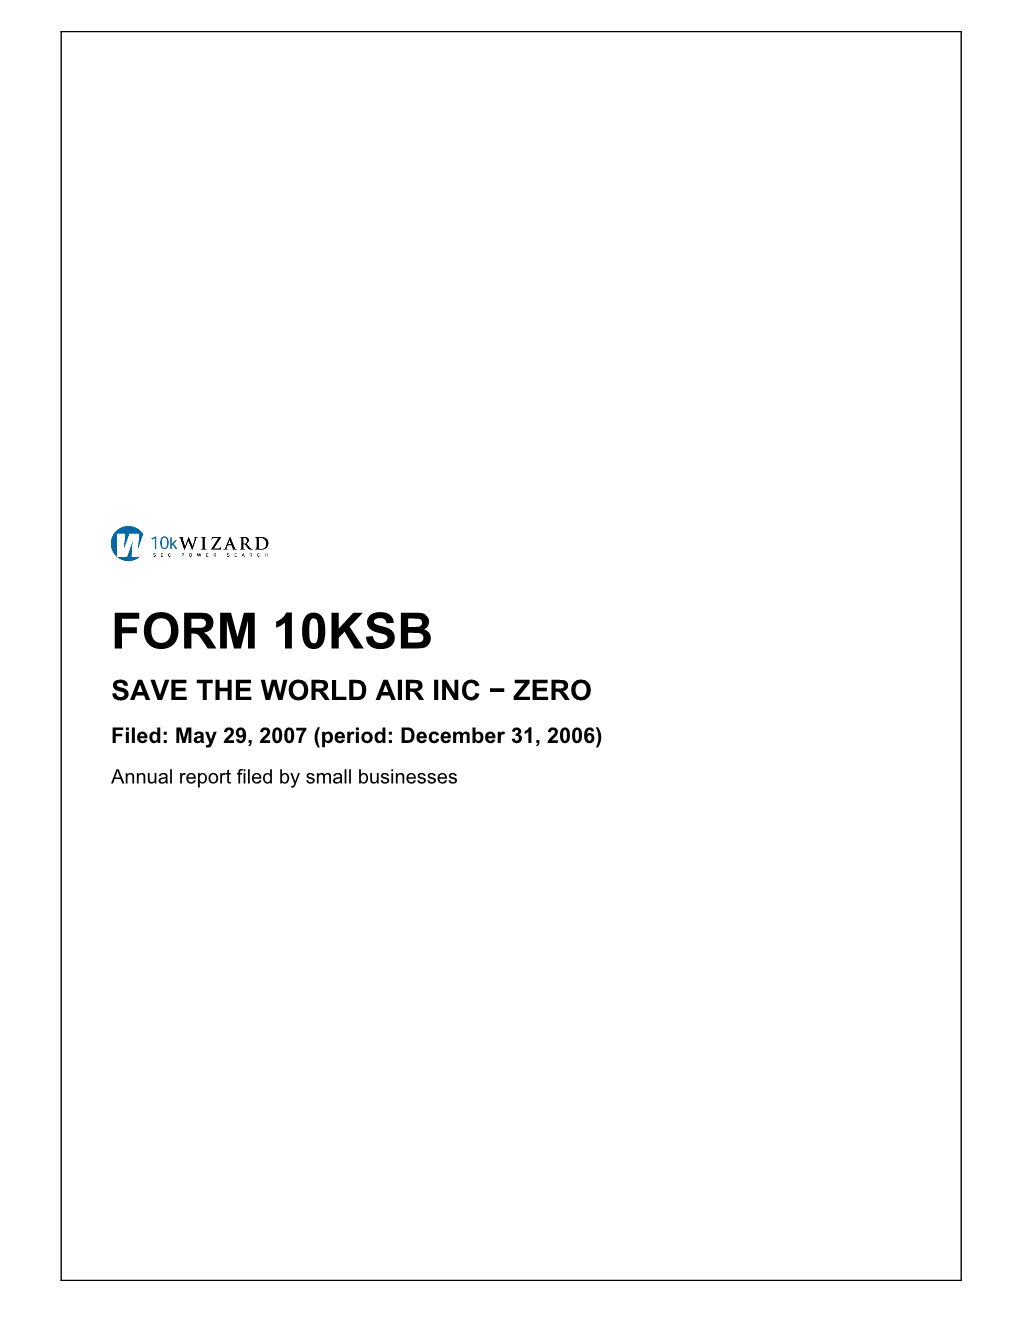 FORM 10KSB SAVE the WORLD AIR INC − ZERO Filed: May 29, 2007 (Period: December 31, 2006)